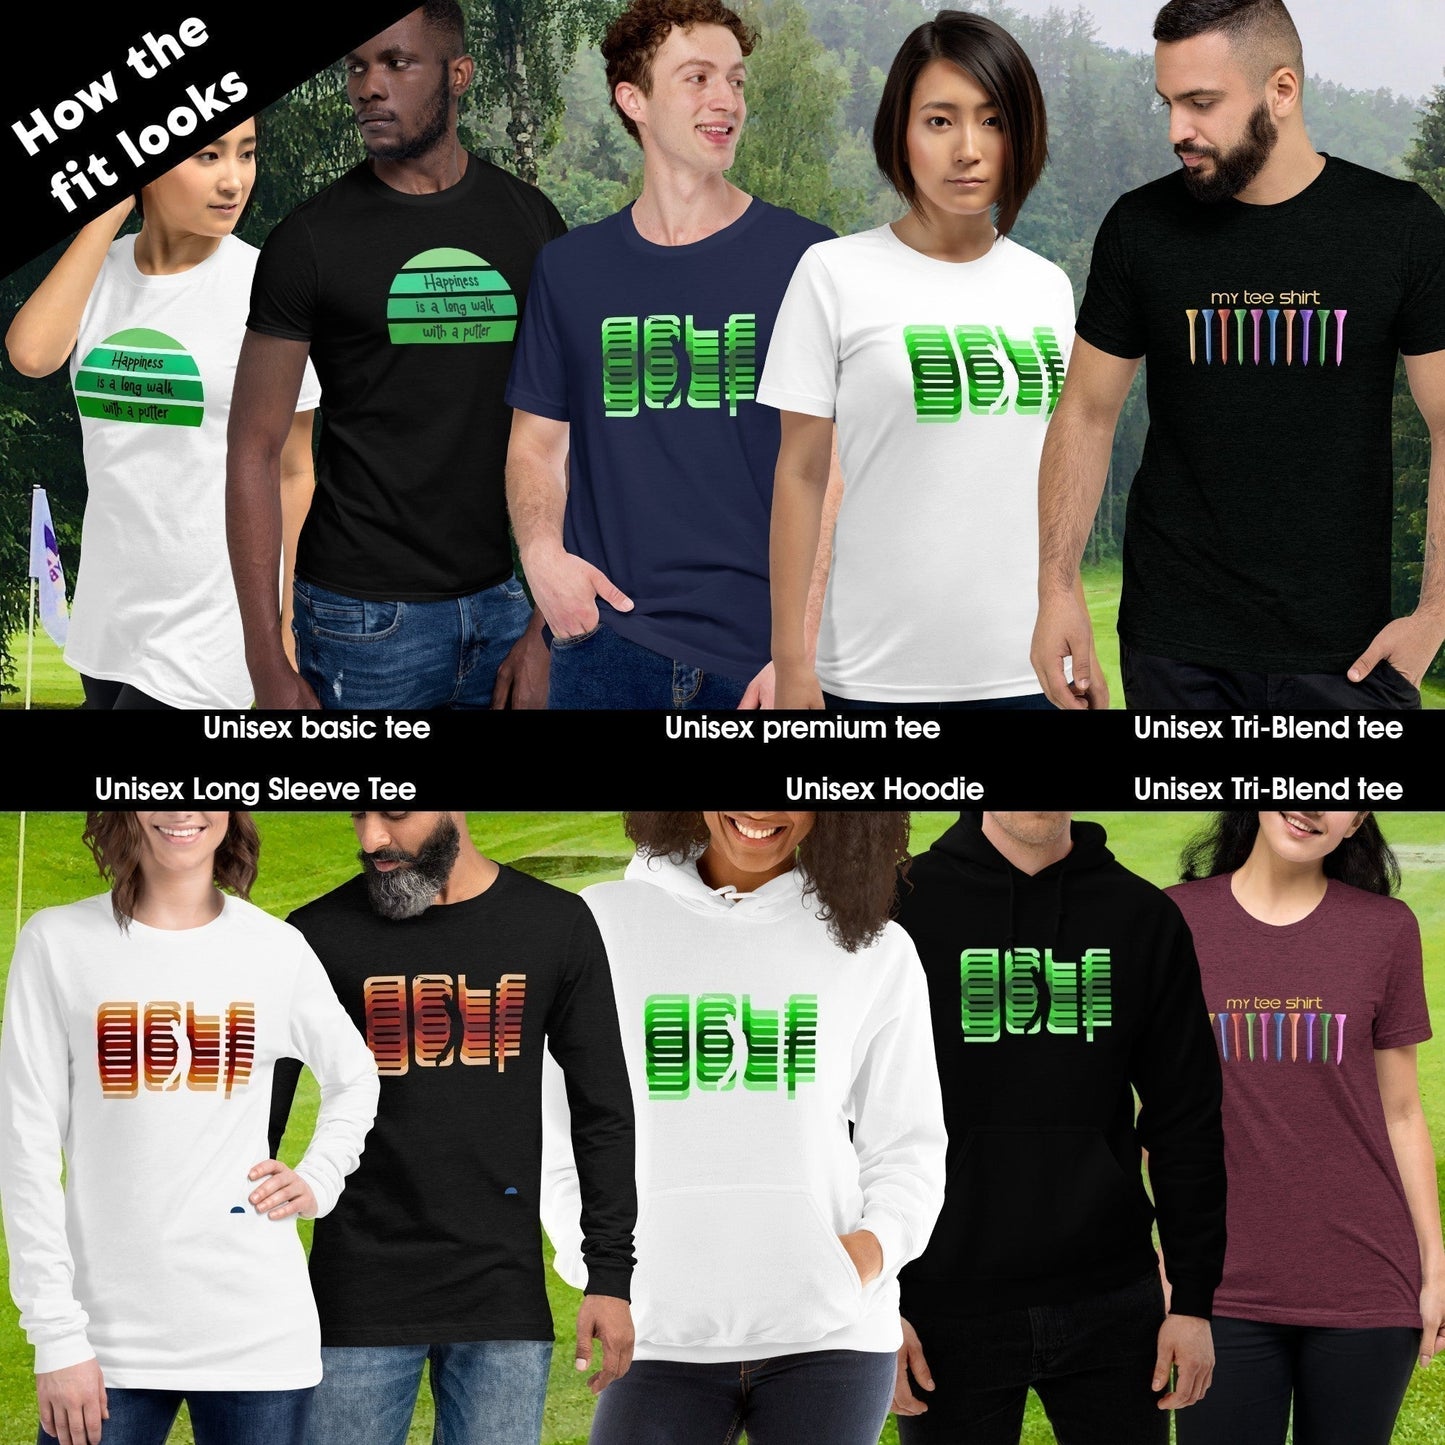 Birdie King Golf TShirt and Hoodie is a Creative Golf Graphic design for Men and Women